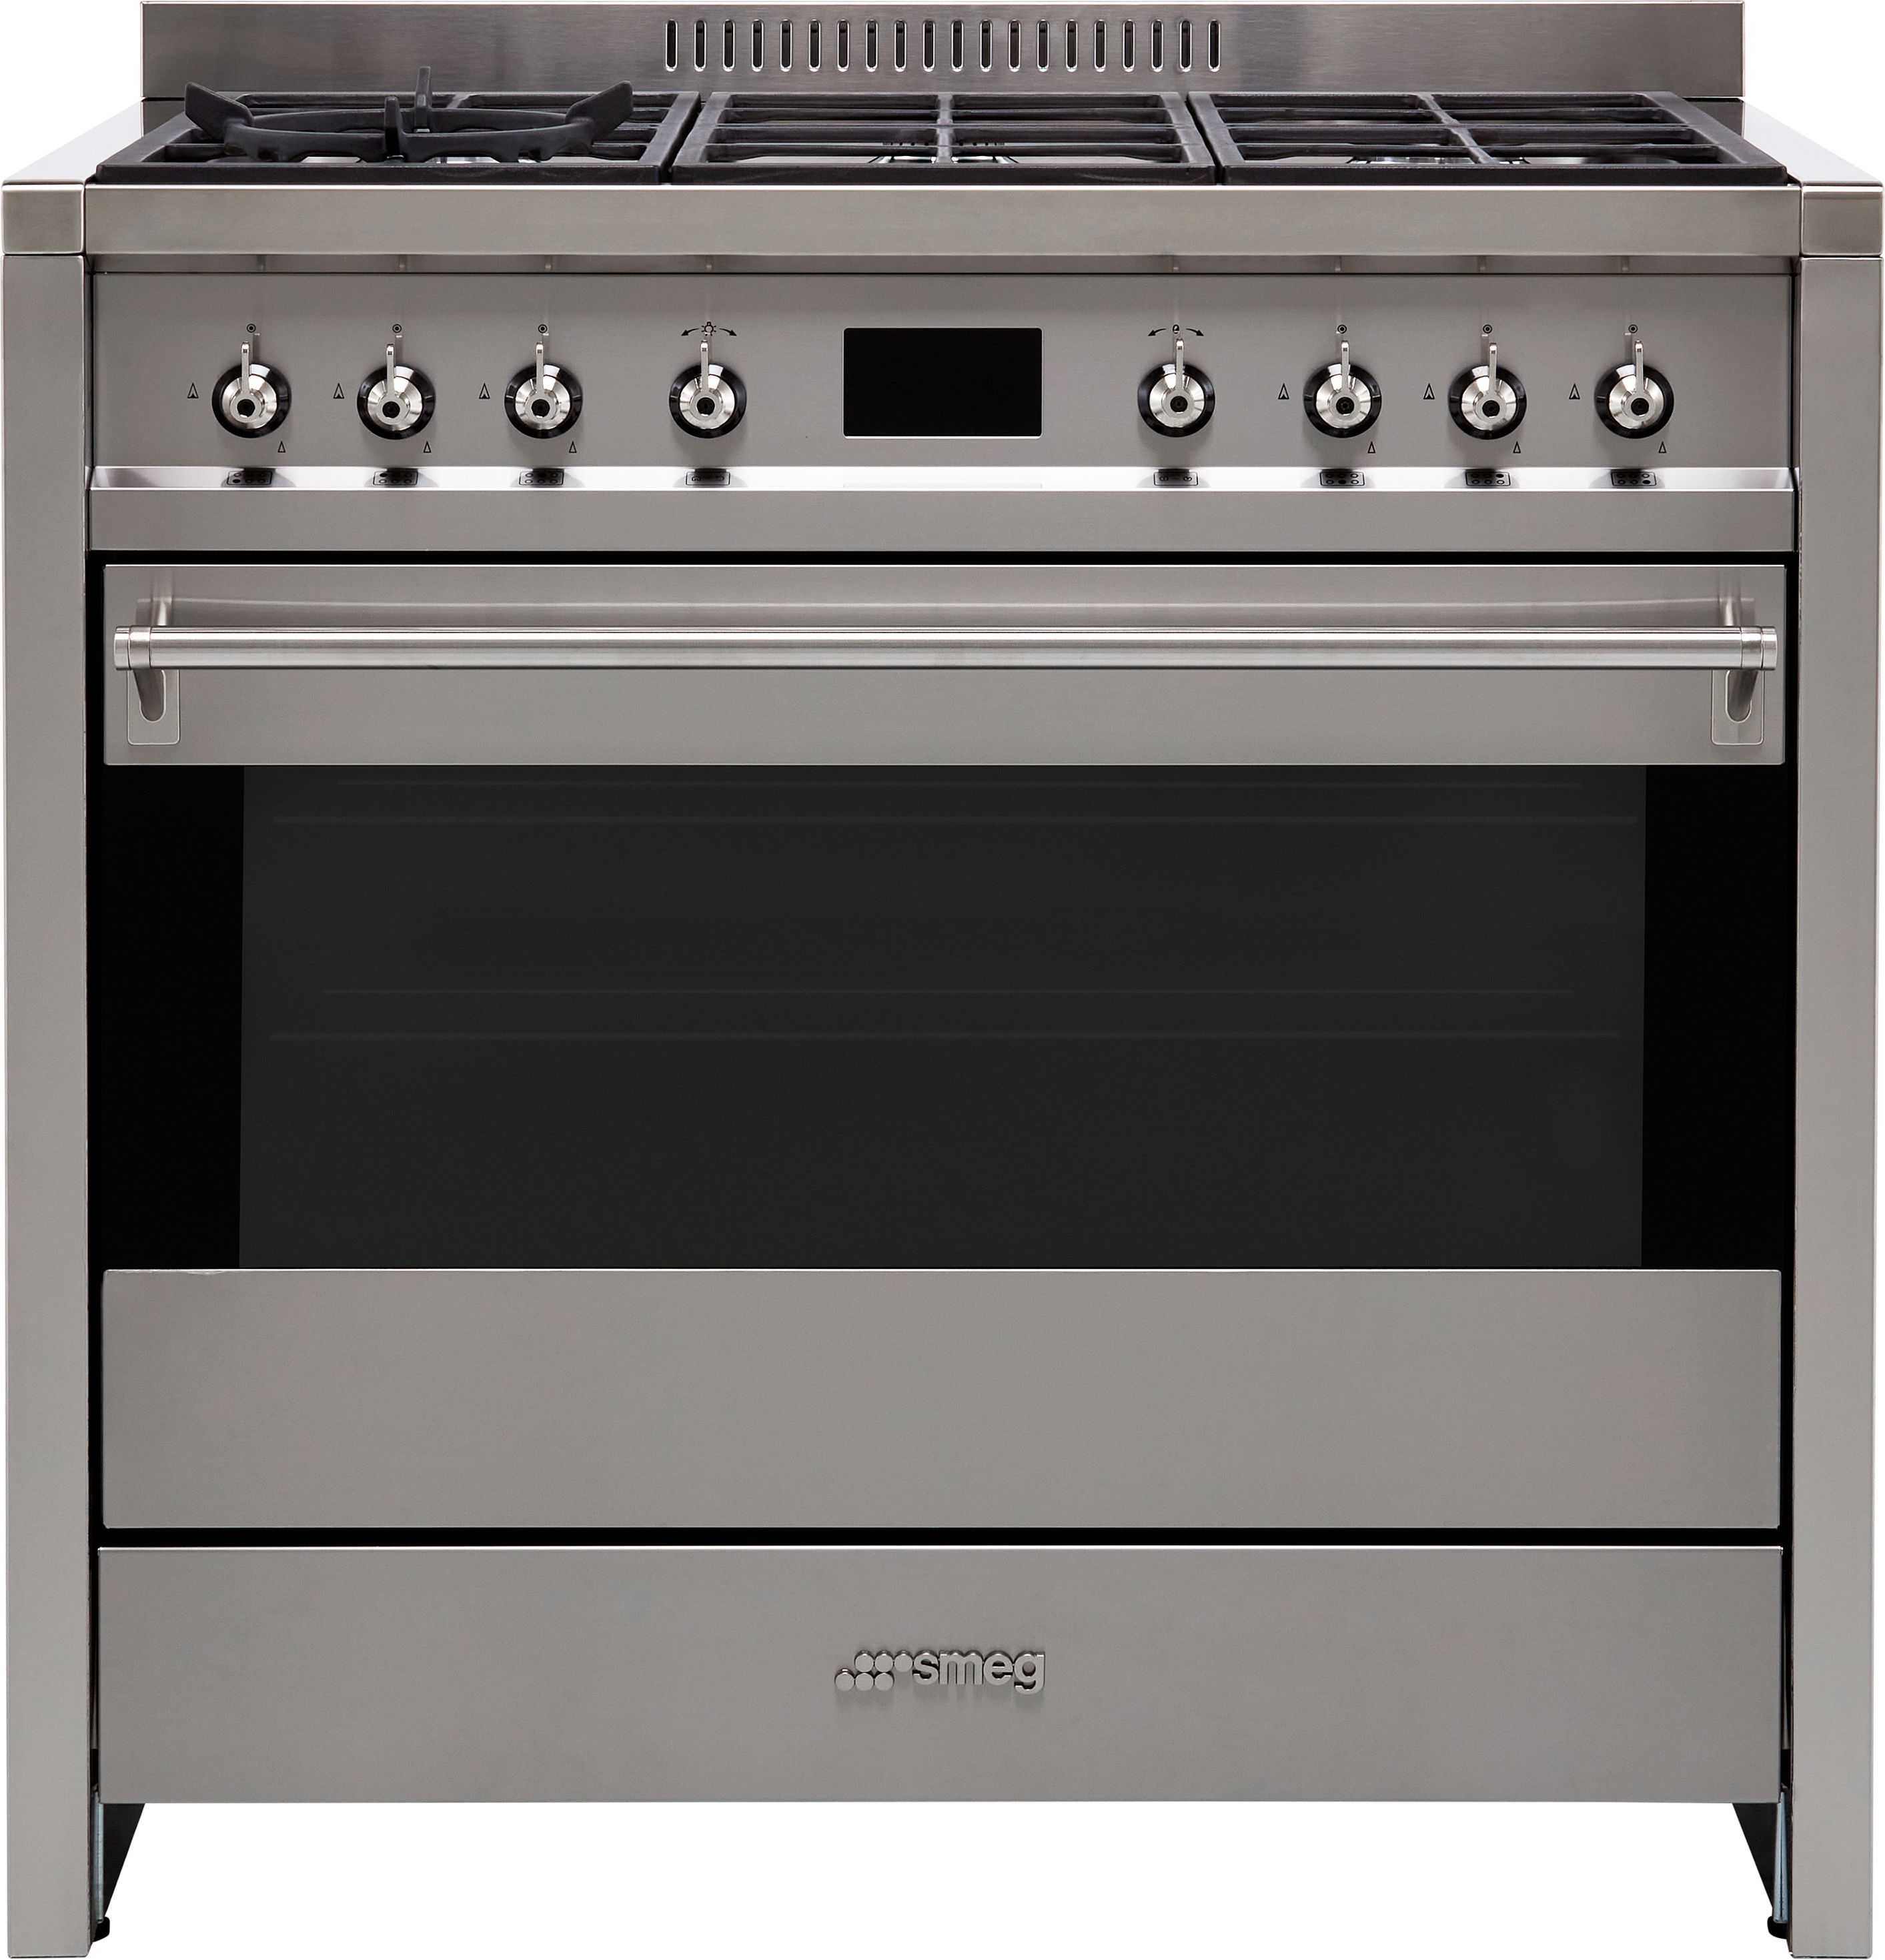 Smeg Opera A1-9 90cm Dual Fuel Range Cooker - Stainless Steel - A+ Rated, Stainless Steel